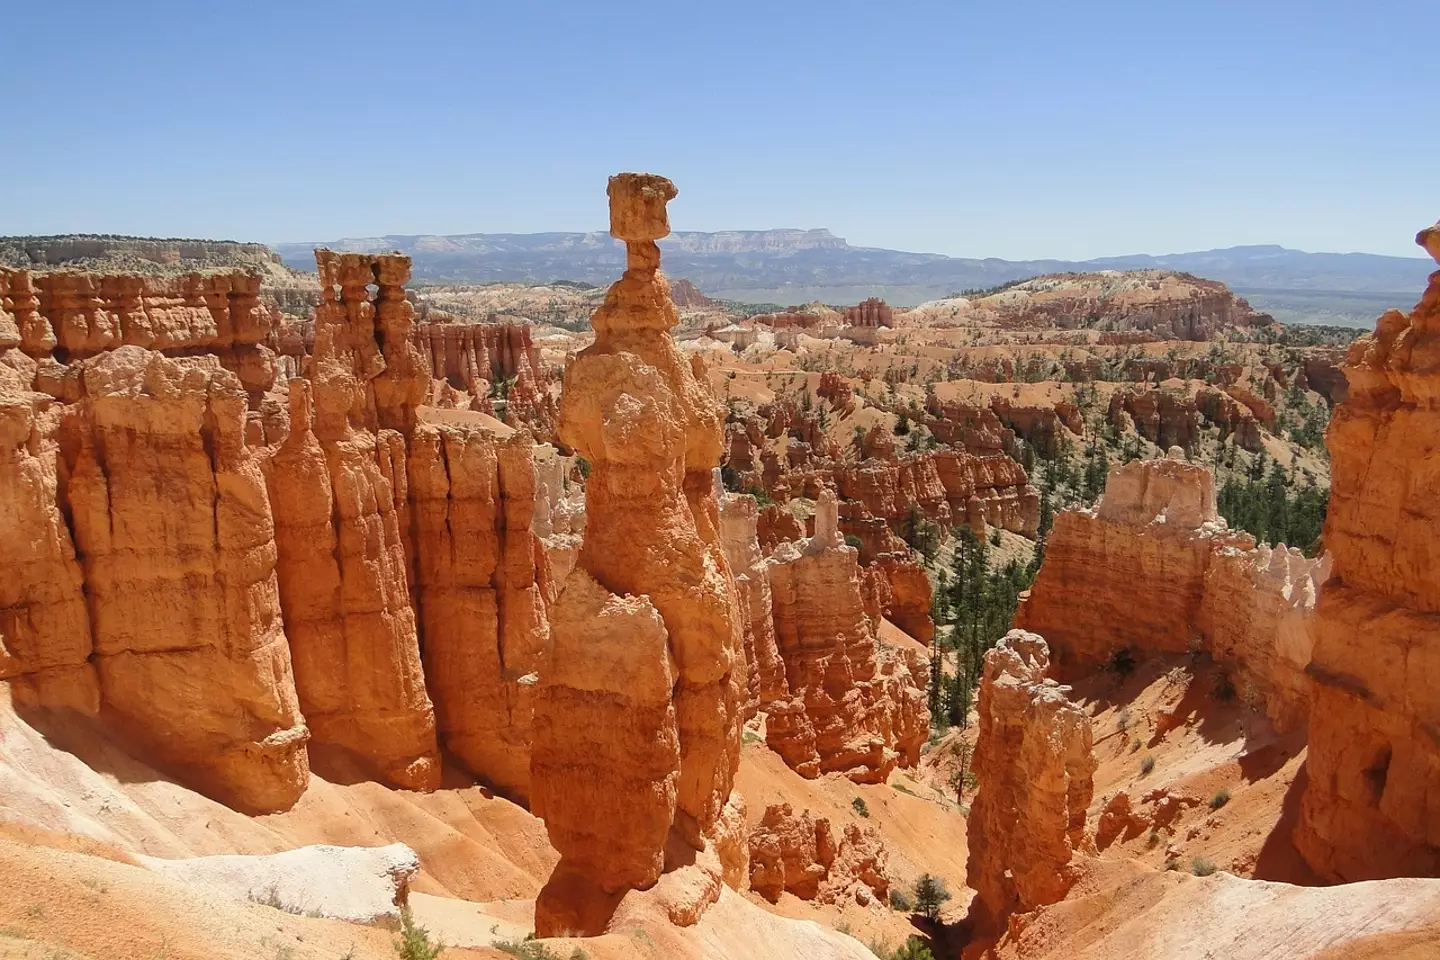 The incident took place at Bryce Canyon in Utah.